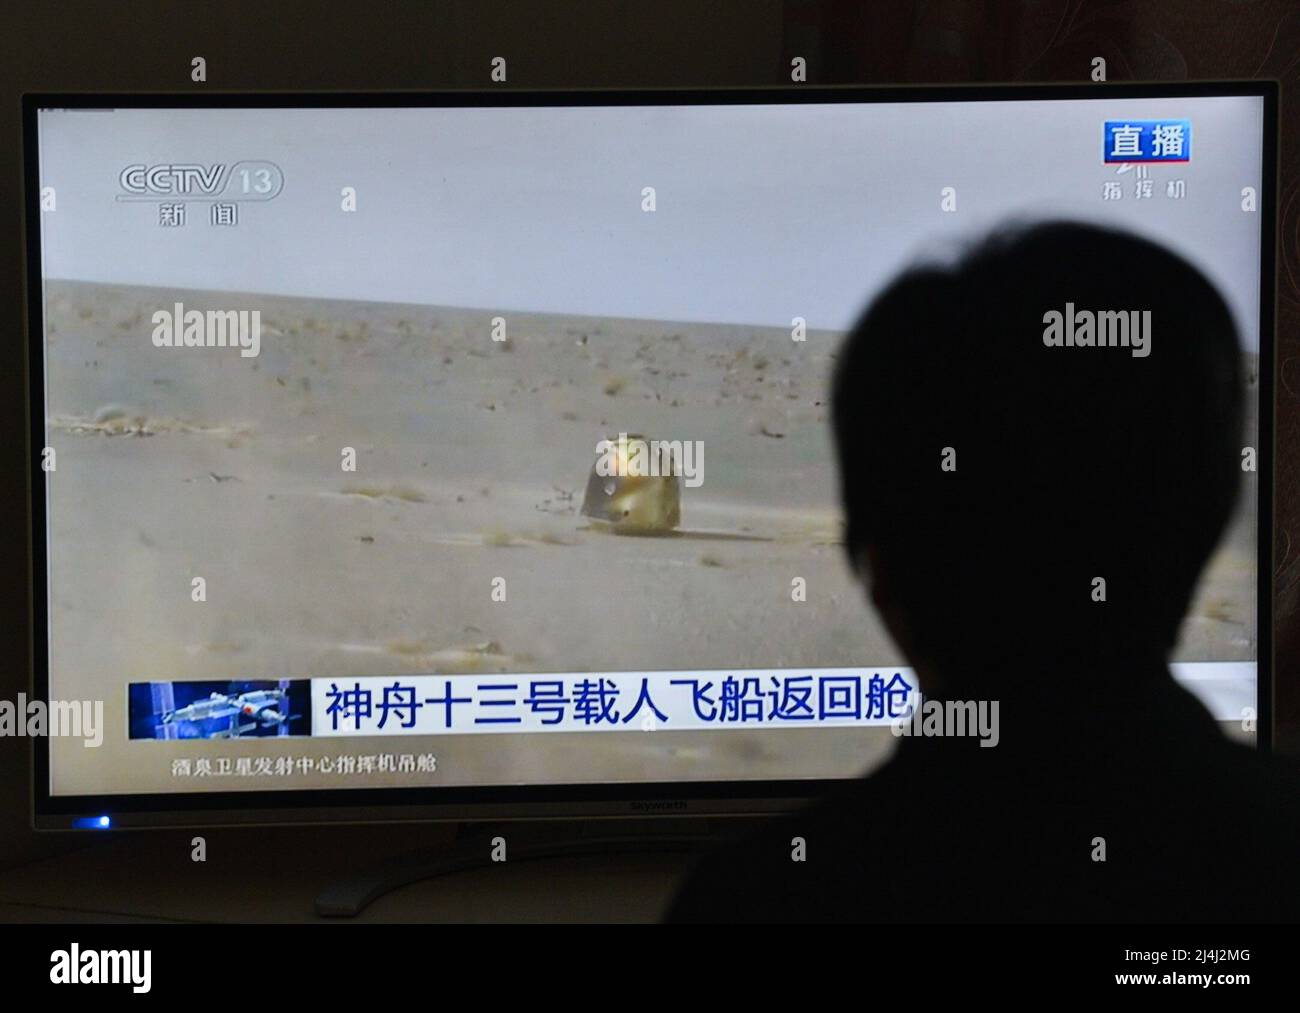 A woman watches a live TV broadcast of the successful landing of the Shenzhou XIII re-entry module. After orbiting Earth for six months, the three crew members of China's Shenzhou XIII mission departed from the Tiangong space station. They returned to the mother planet on Saturday morning, finishing the nation's longest human-crewed spaceflight. Major General Zhai Zhigang, the mission commander, Senior Colonel Wang Yaping, and Senior Colonel Ye Guangfu breathed fresh air for the first time after the half-year space journey as ground recovery personnel opened the hatch of their re-entry capsule Stock Photo